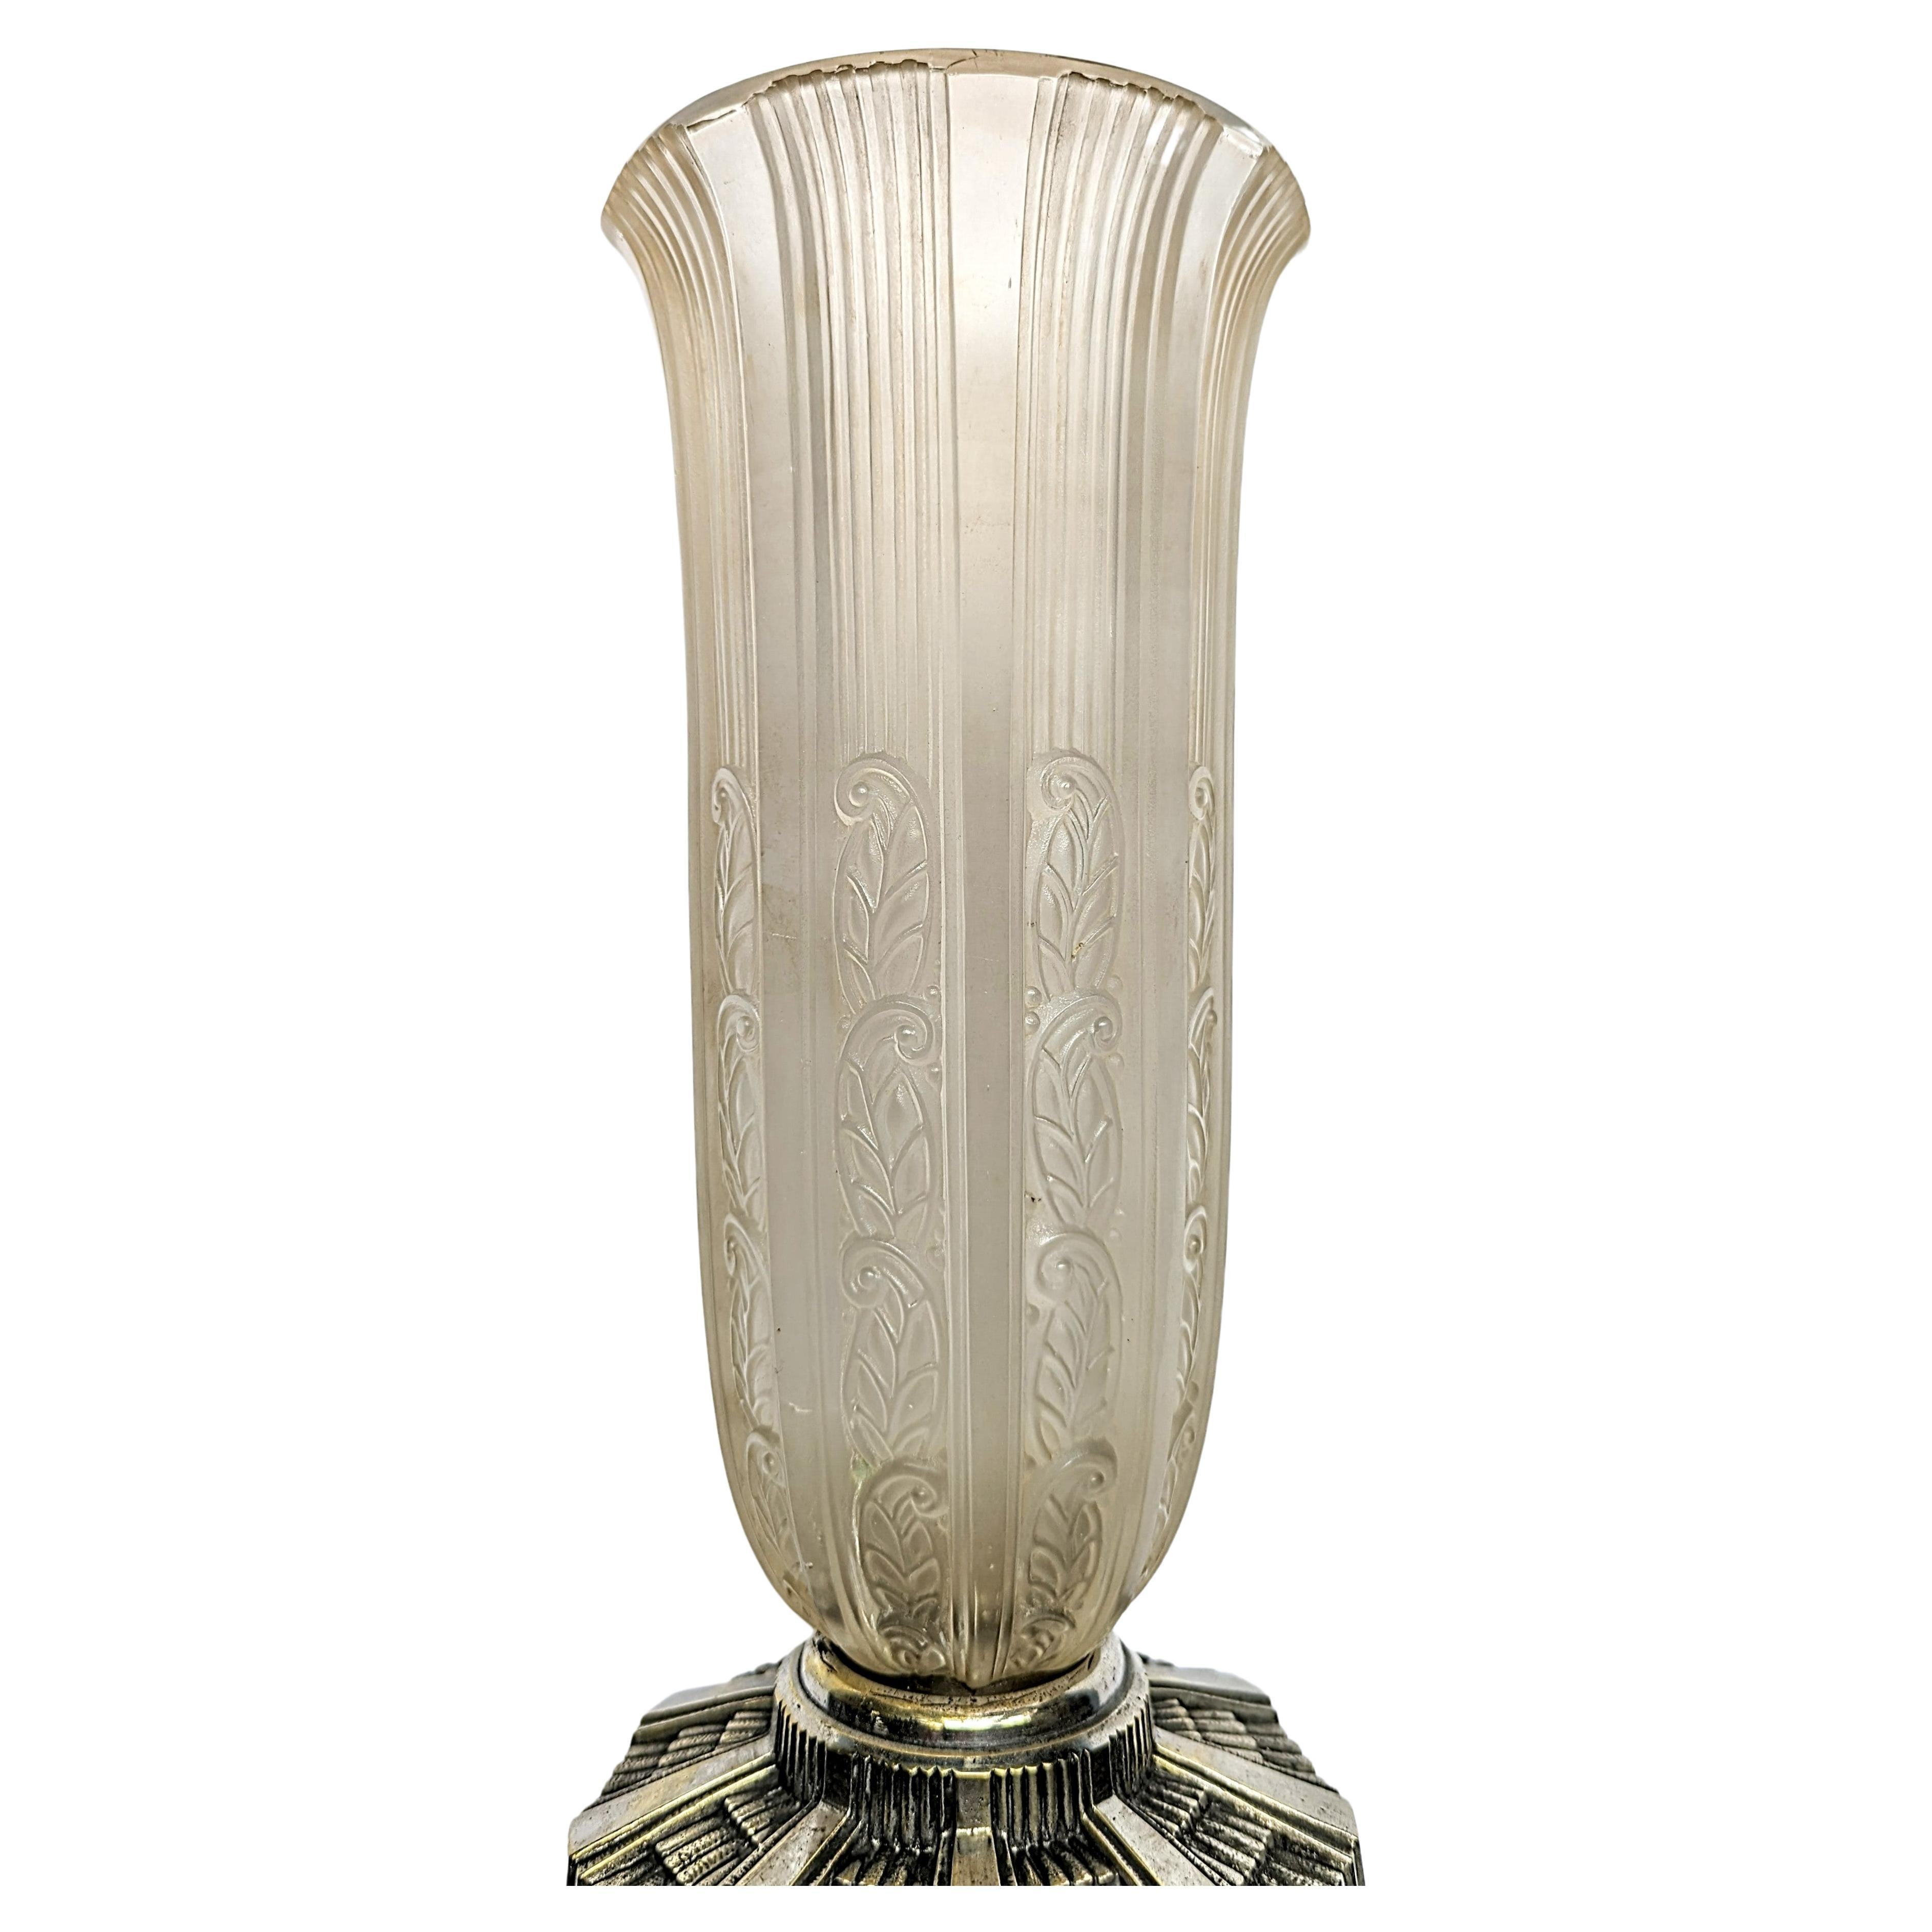 20th Century French Art Deco Glass Vase by Hettier & Vincent For Sale